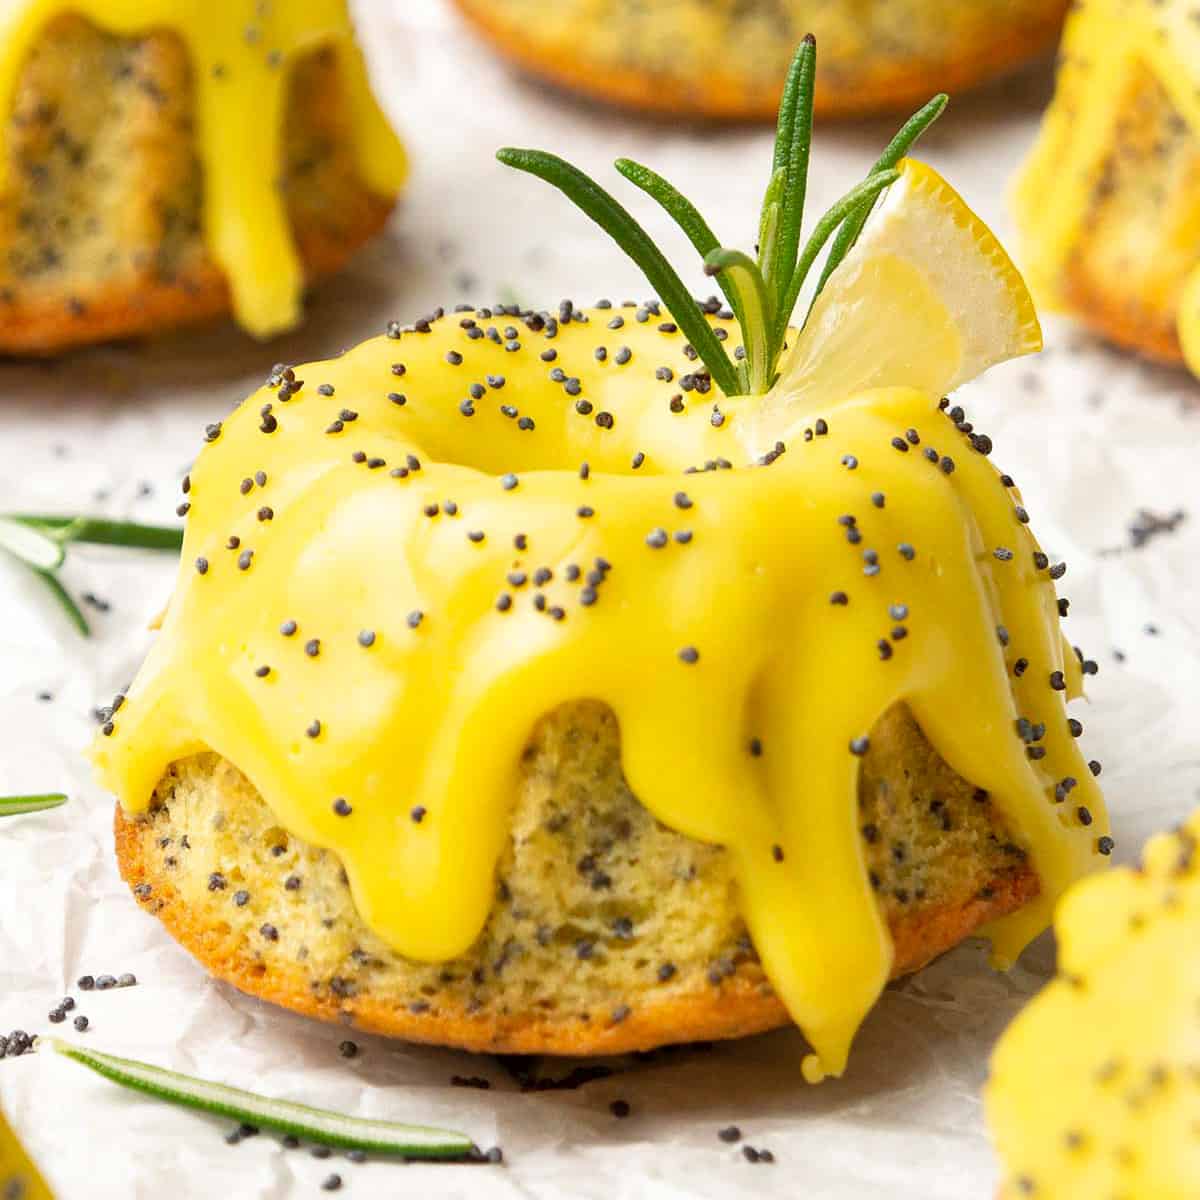 <p>These mini <a href="https://www.spatuladesserts.com/easy-mini-bundt-cake-recipe/">Lemon Poppyseed Mini Bundt Cakes</a> are the perfect treat that can be whipped up quickly and effortlessly. With the addition of lemon zest, the cakes are not only incredibly moist but also just as flavorful. Additionally, these little delights only take an hour from start to finish, making them an easy dessert option for any time the craving strikes.</p> <p><strong>Go to the recipe: <a href="https://www.spatuladesserts.com/easy-mini-bundt-cake-recipe/">Lemon Poppyseed Mini Bundt Cakes</a></strong></p>